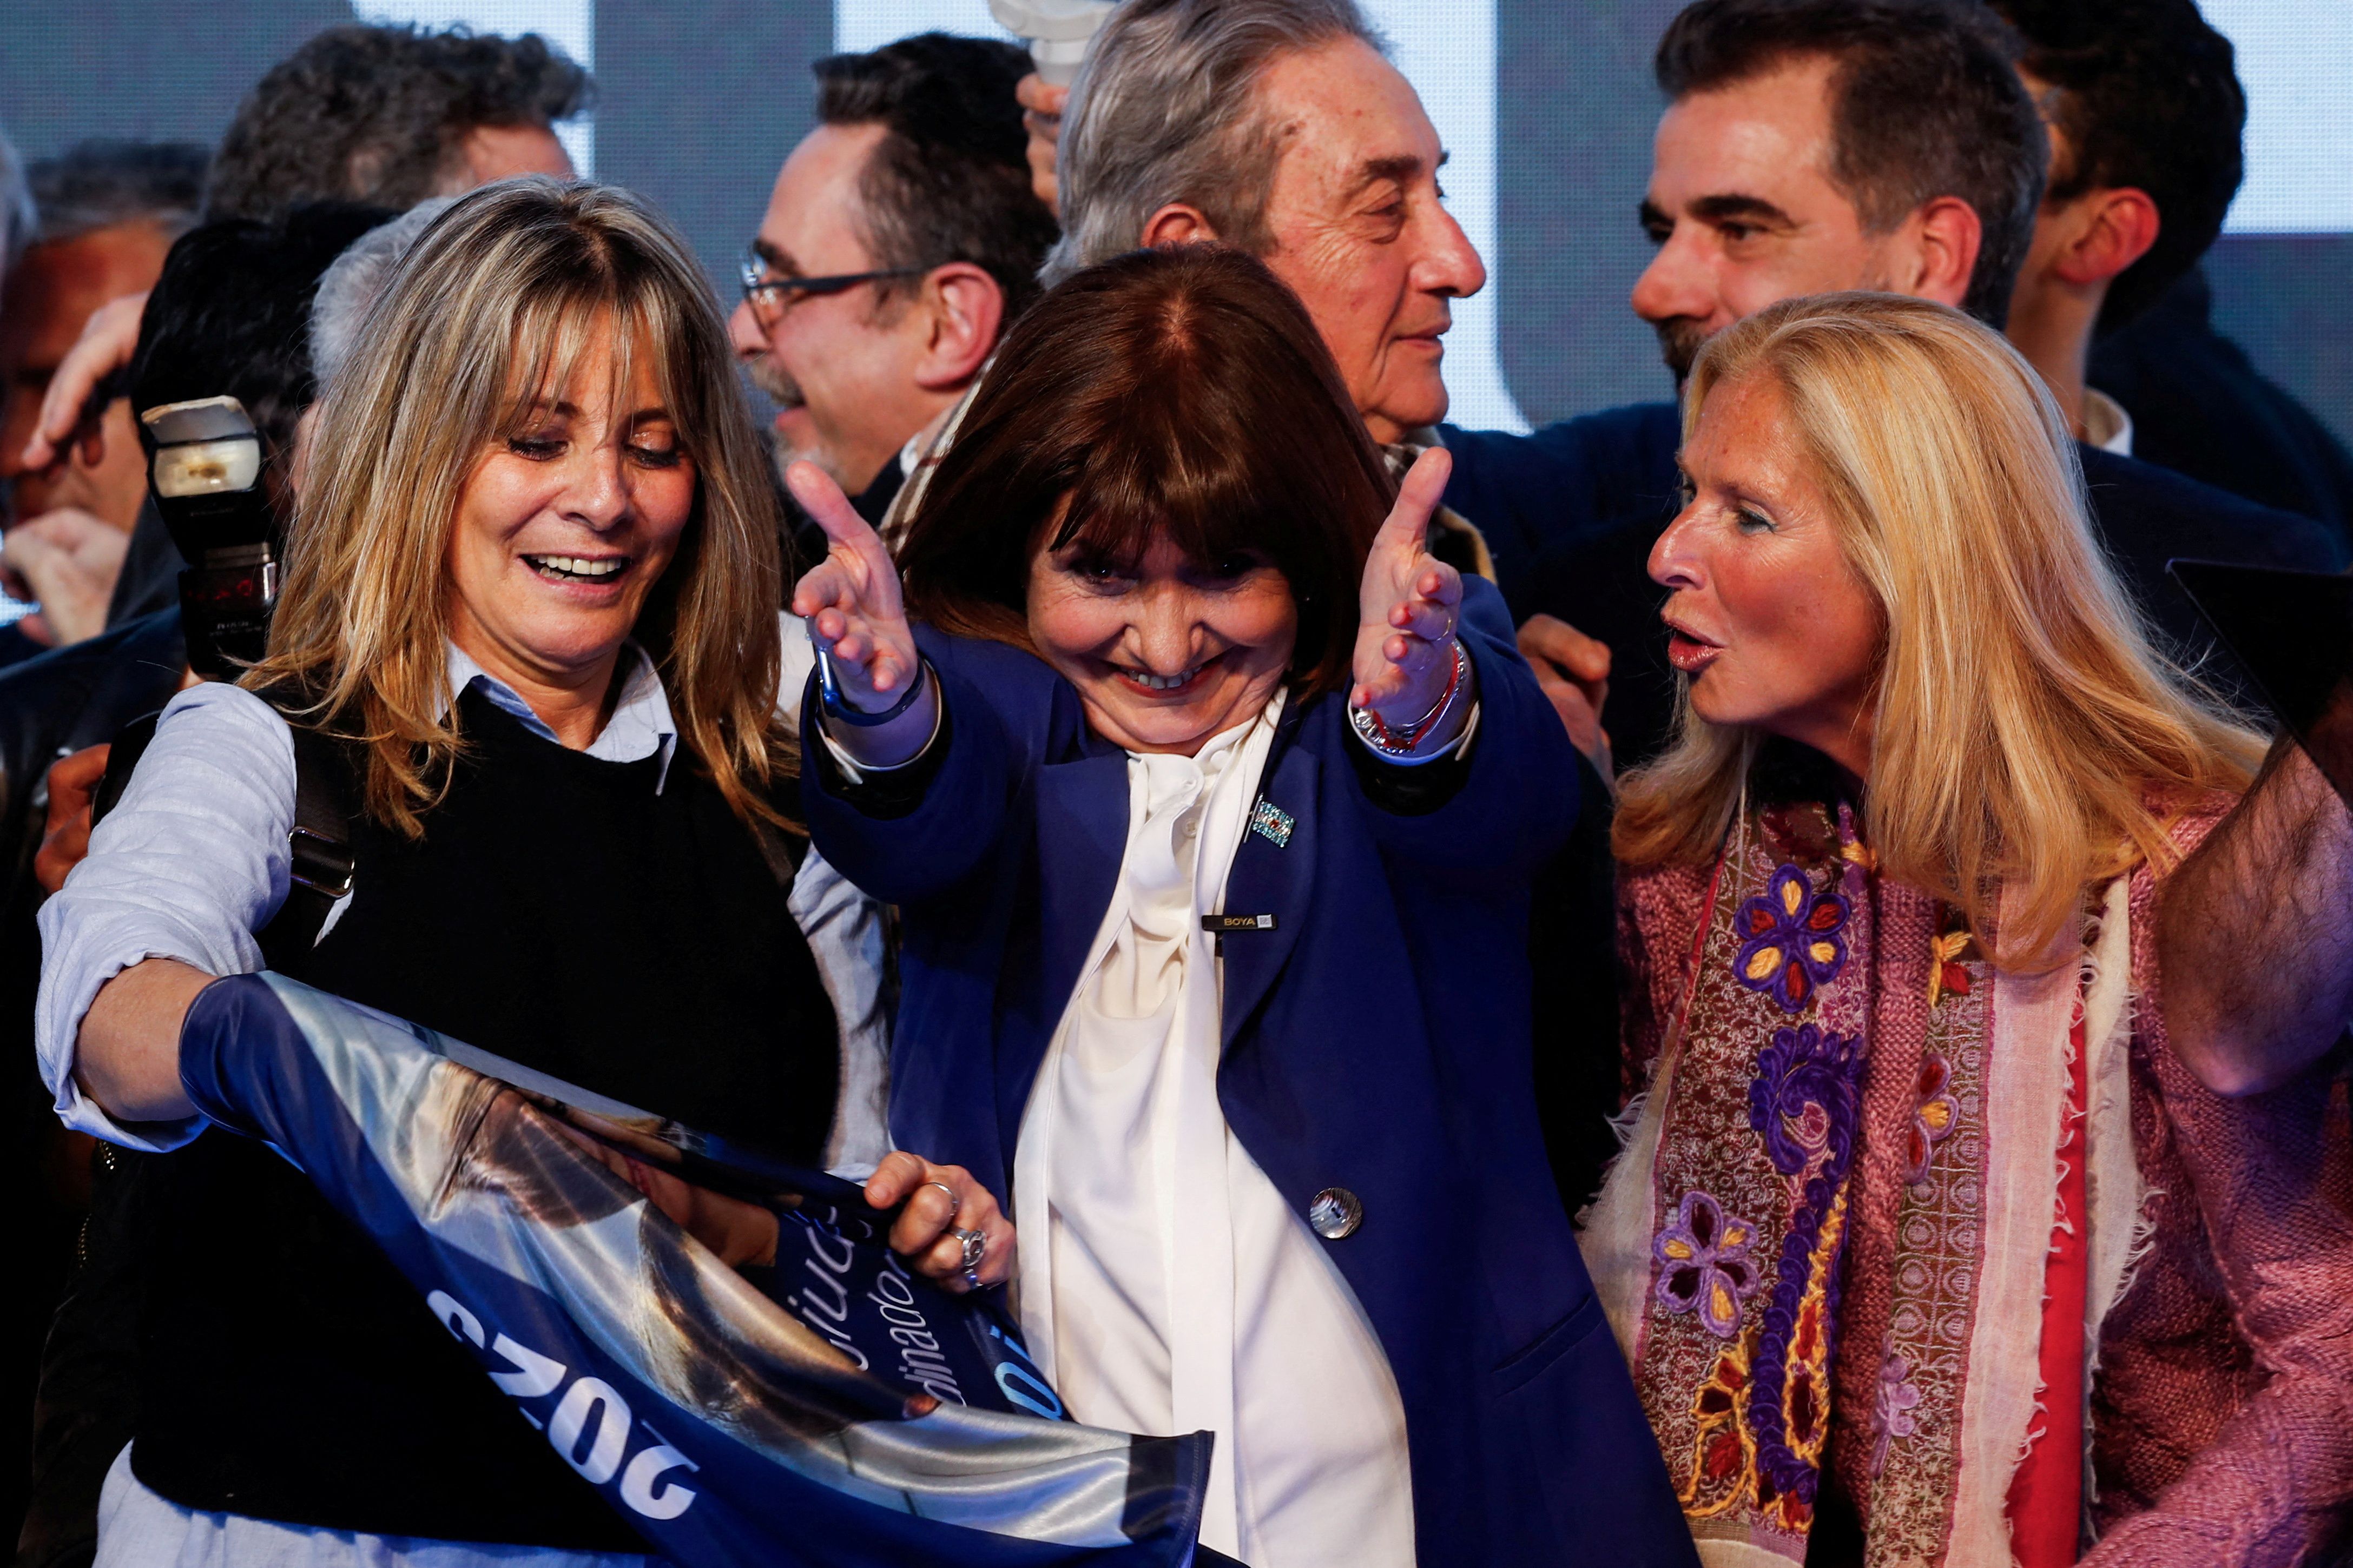 Patricia Bullrich will represent Juntos por el Cambio as a candidate for president of the Nation in the general elections